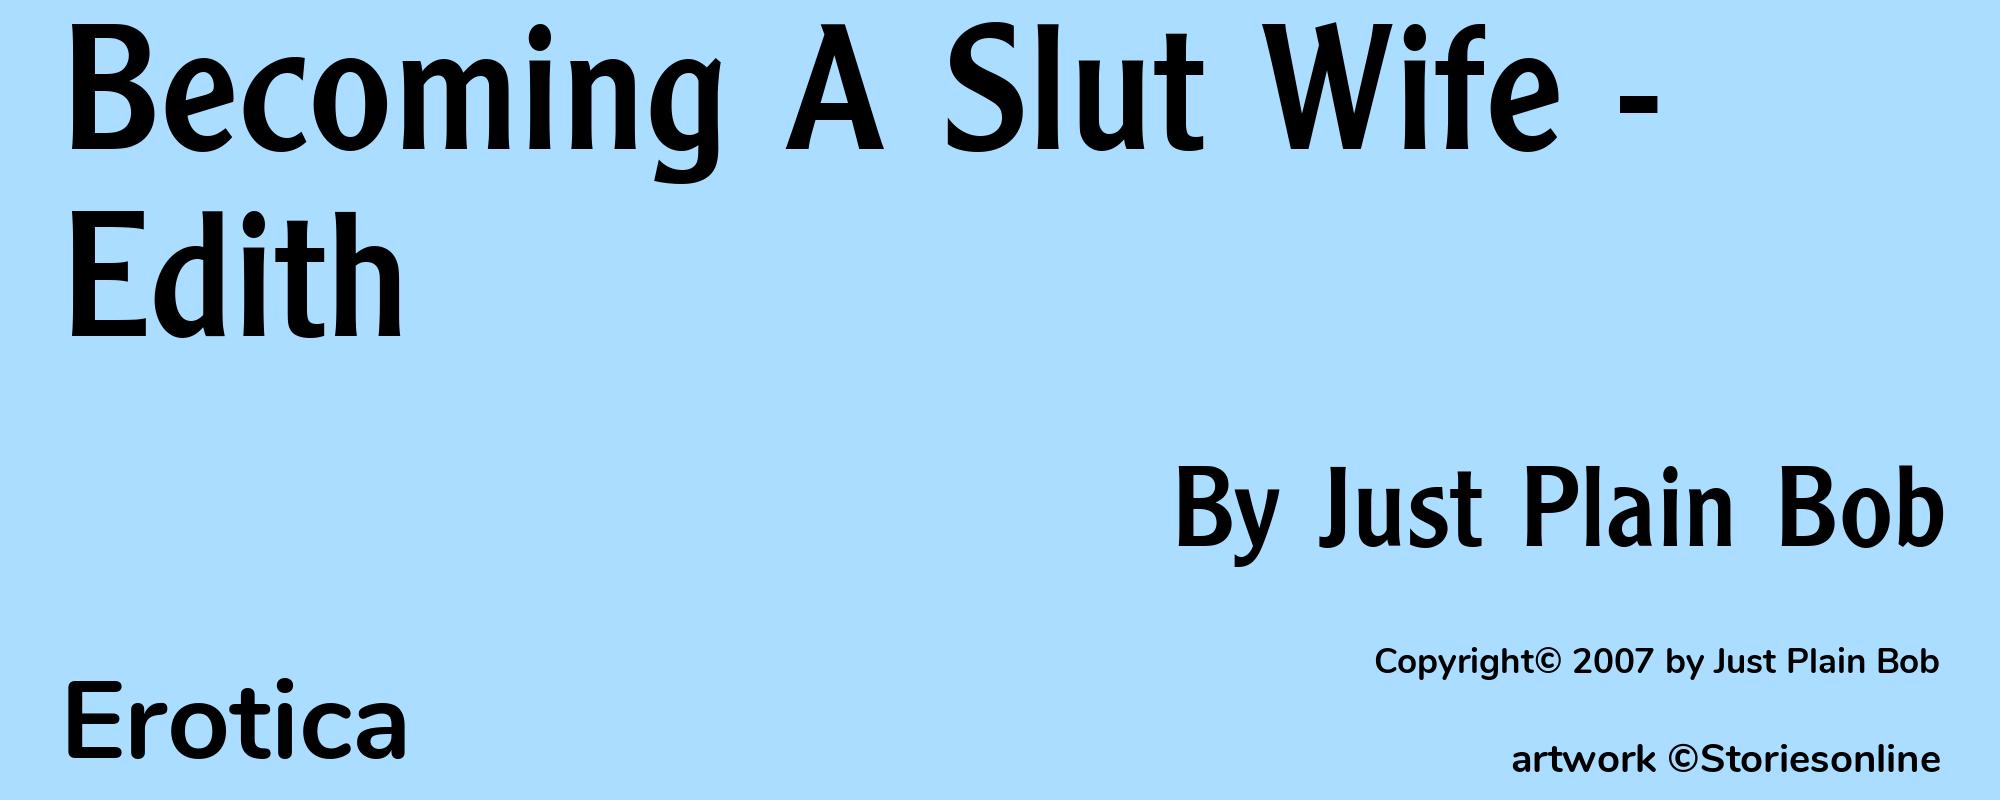 Becoming A Slut Wife - Edith - Cover